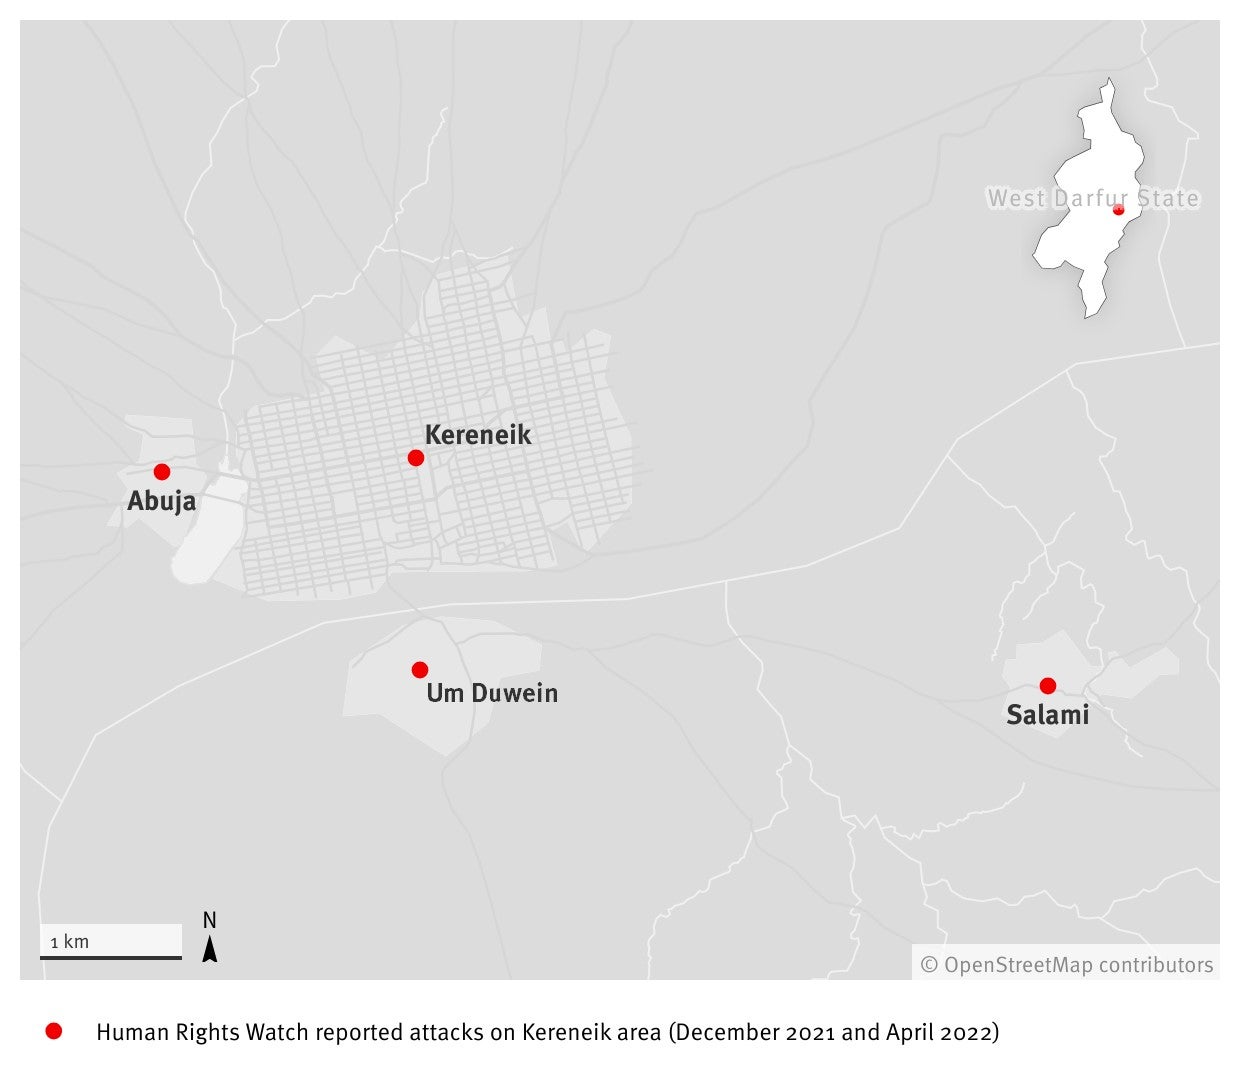 Locations of the reported attacks on Kereneik area in December 2021 and April 2022. 